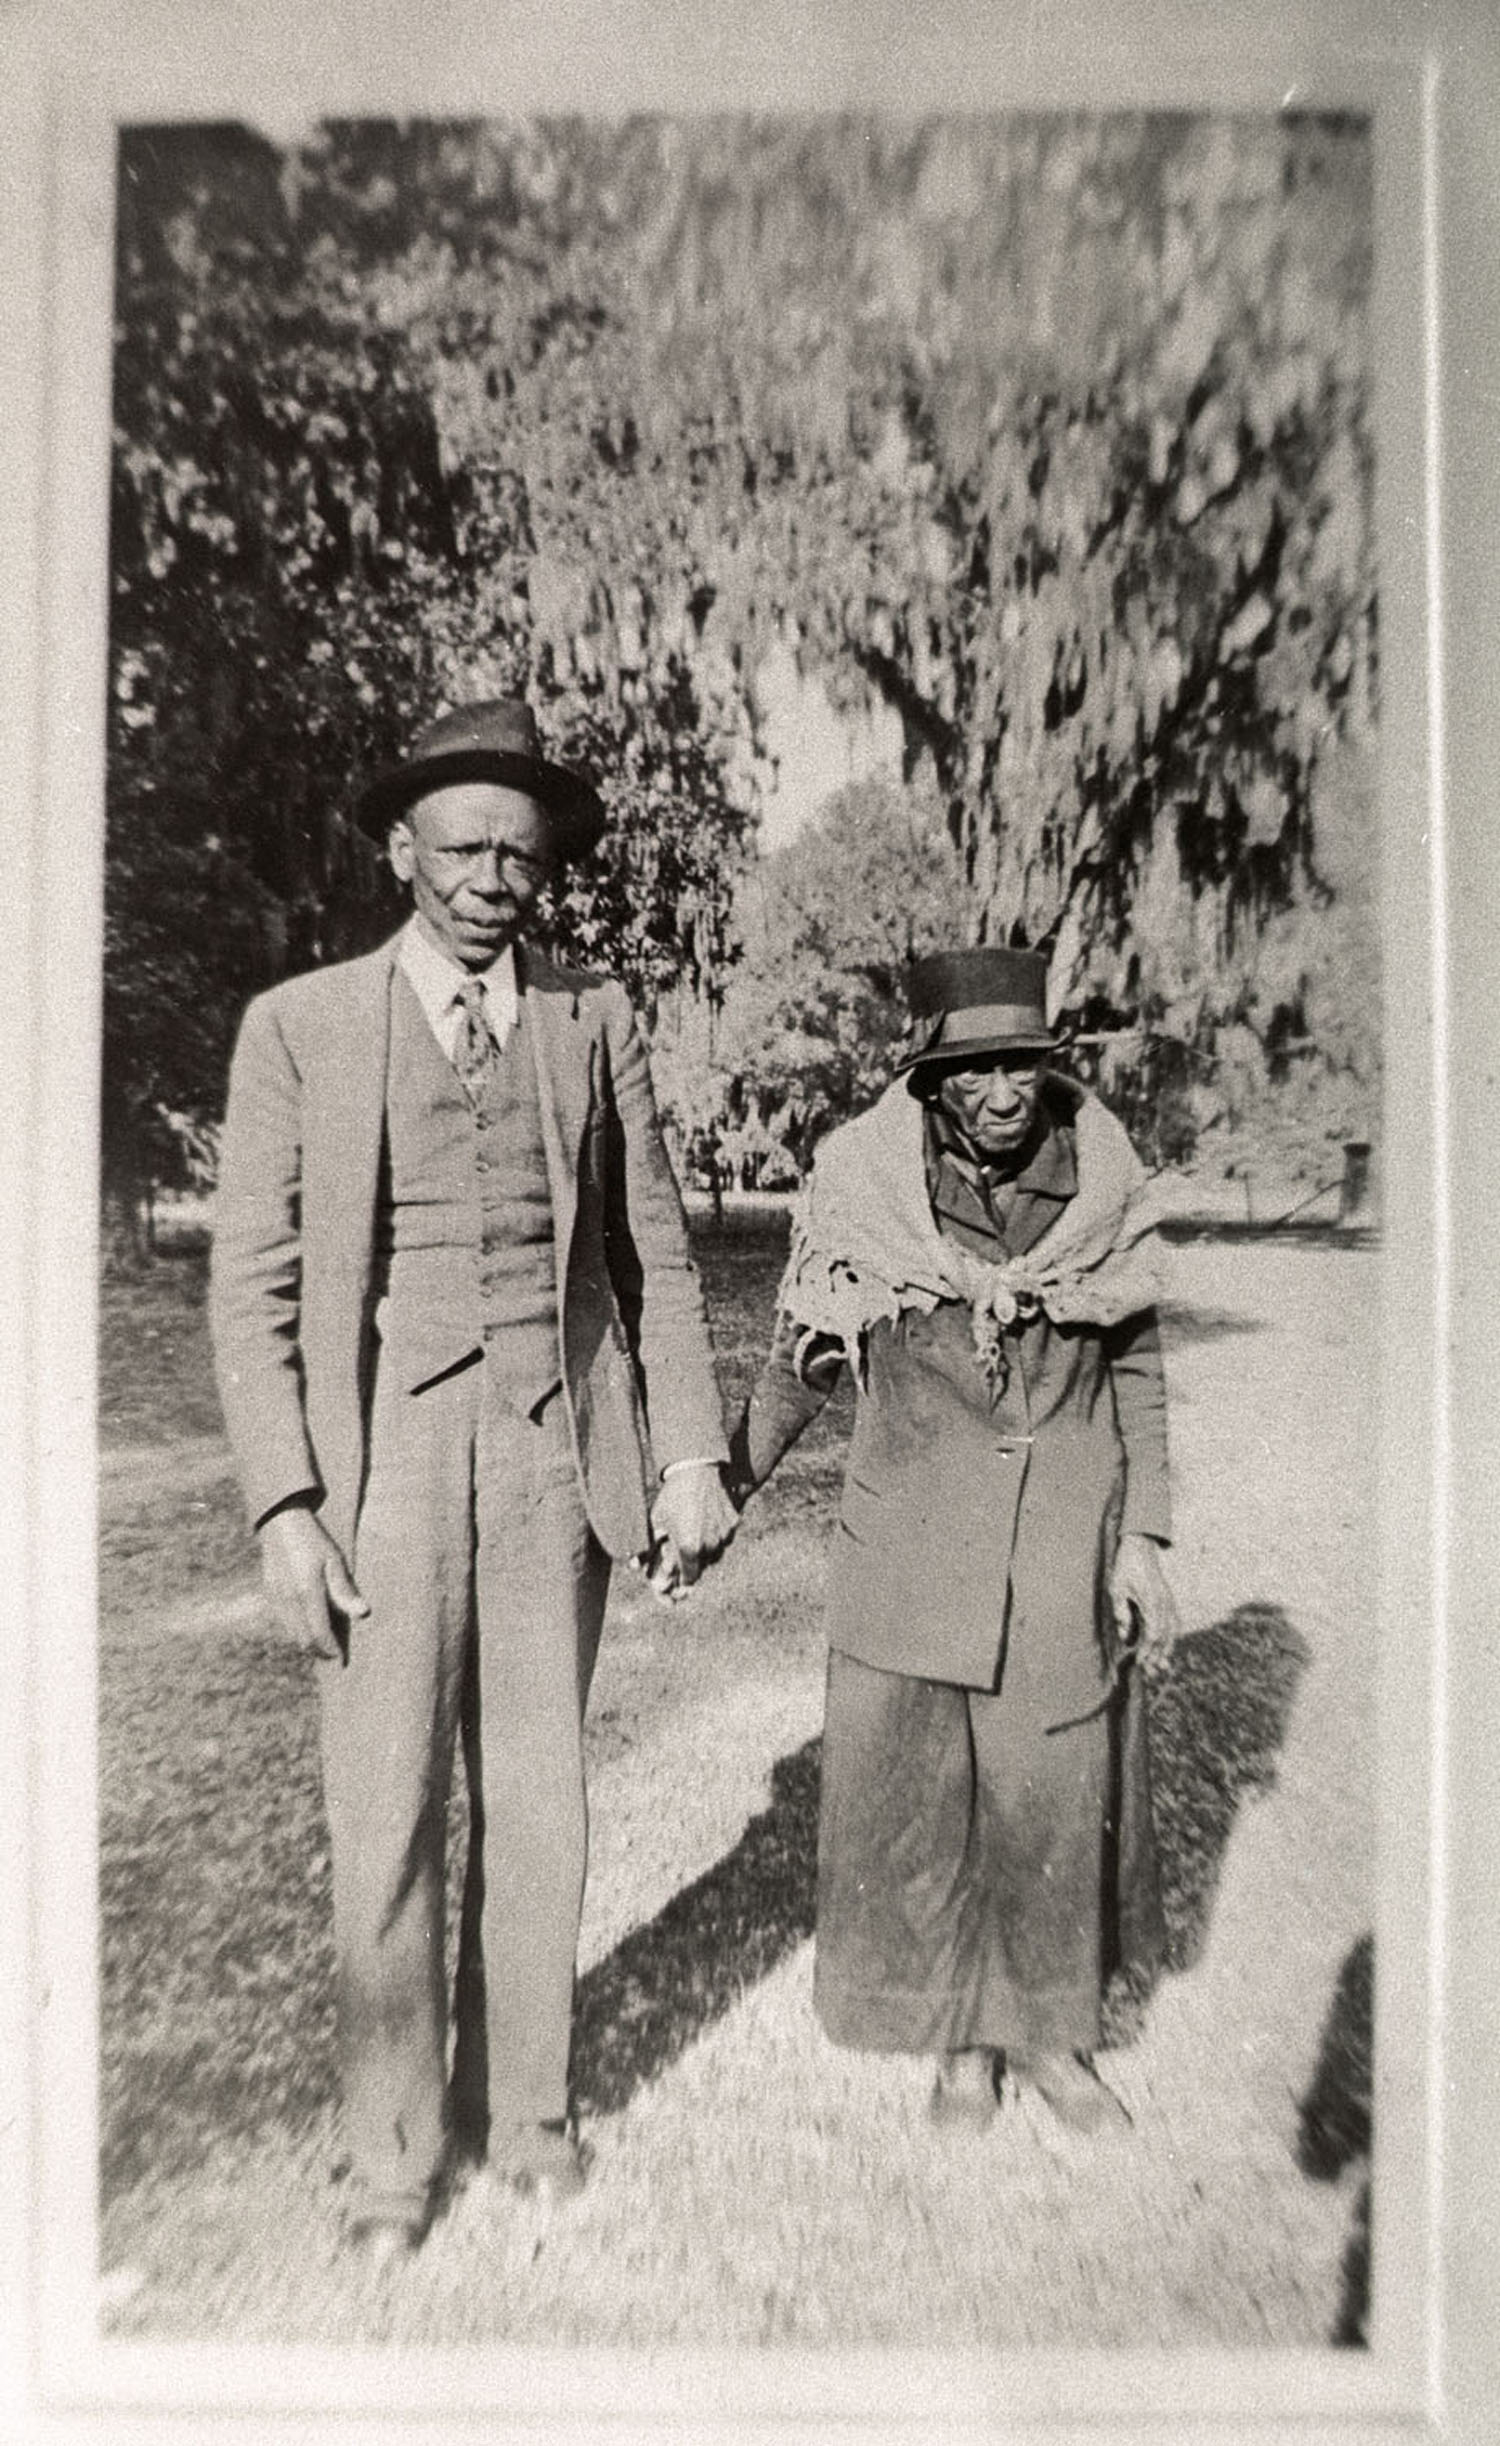 A historic image on loan to Drayton Hall with previosuly unidentified subjects. Emmie Lee Jenkins was able to identify the two people as Charles Bowens and his older sister Mary Bowens Fenneck, the two oldest children of Caesar and Ella Camel Bowens.